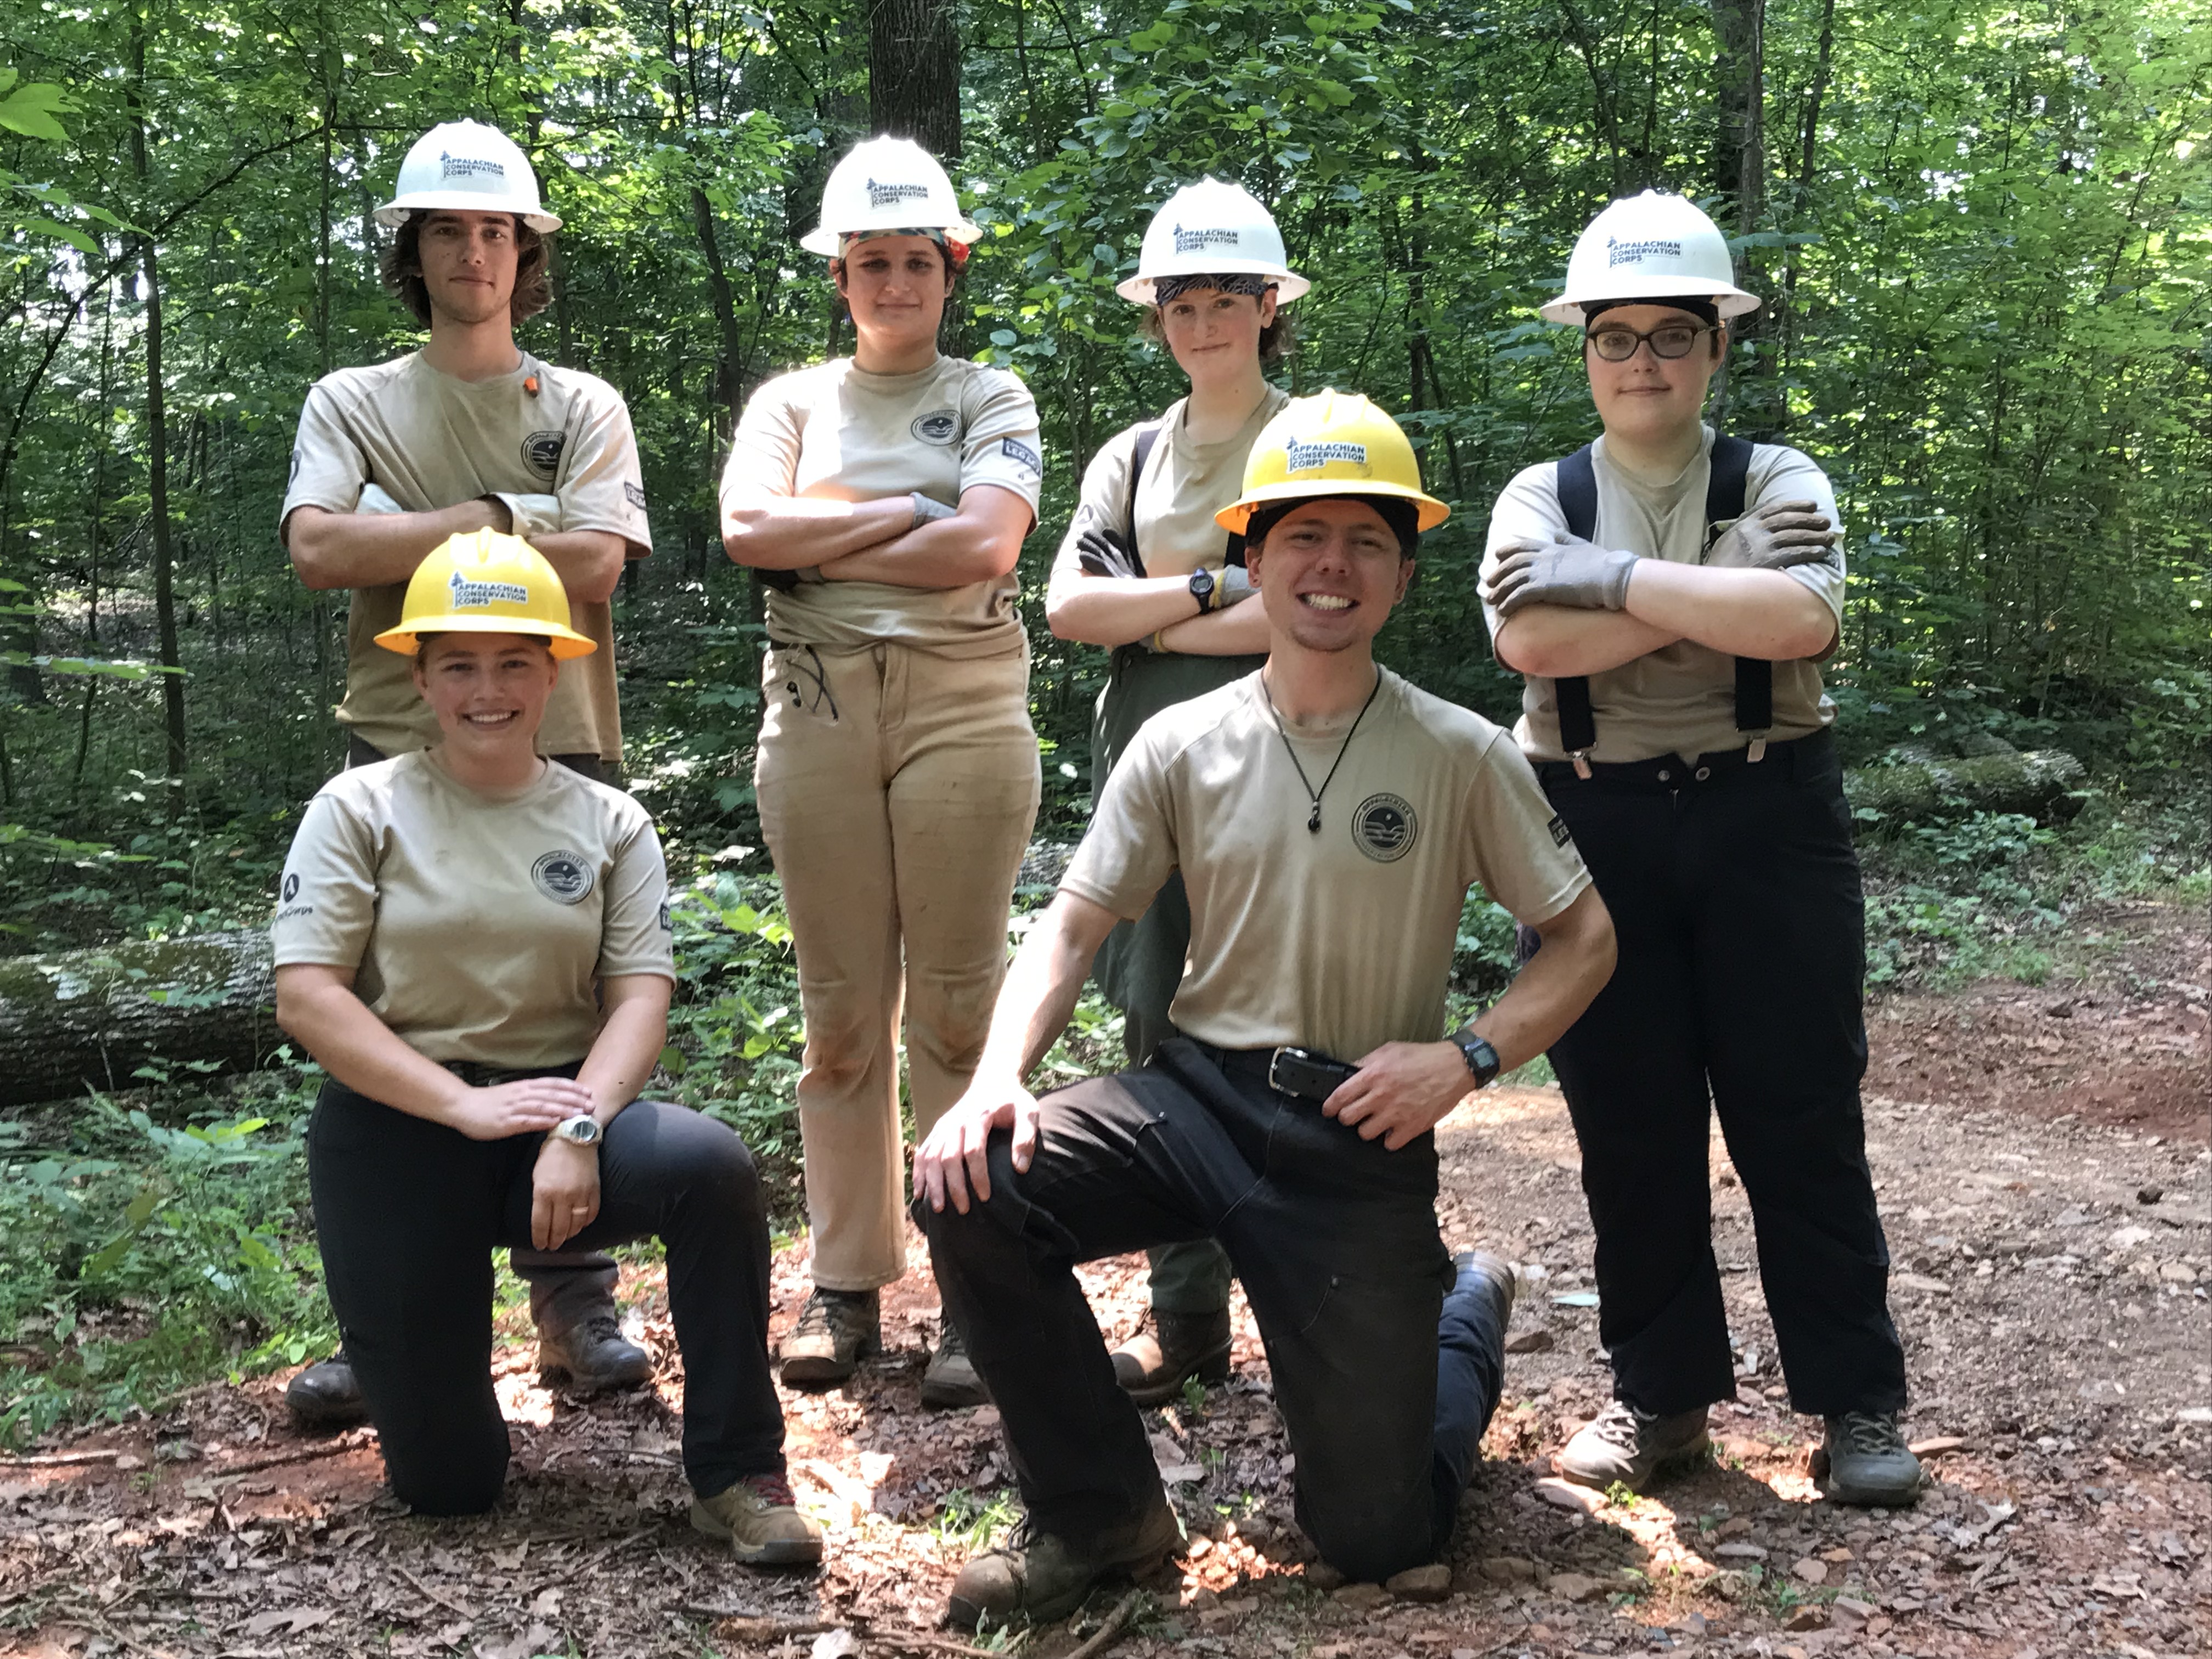 Six young trail crew members wearing khaki and hard hats stand as a group with arms folded